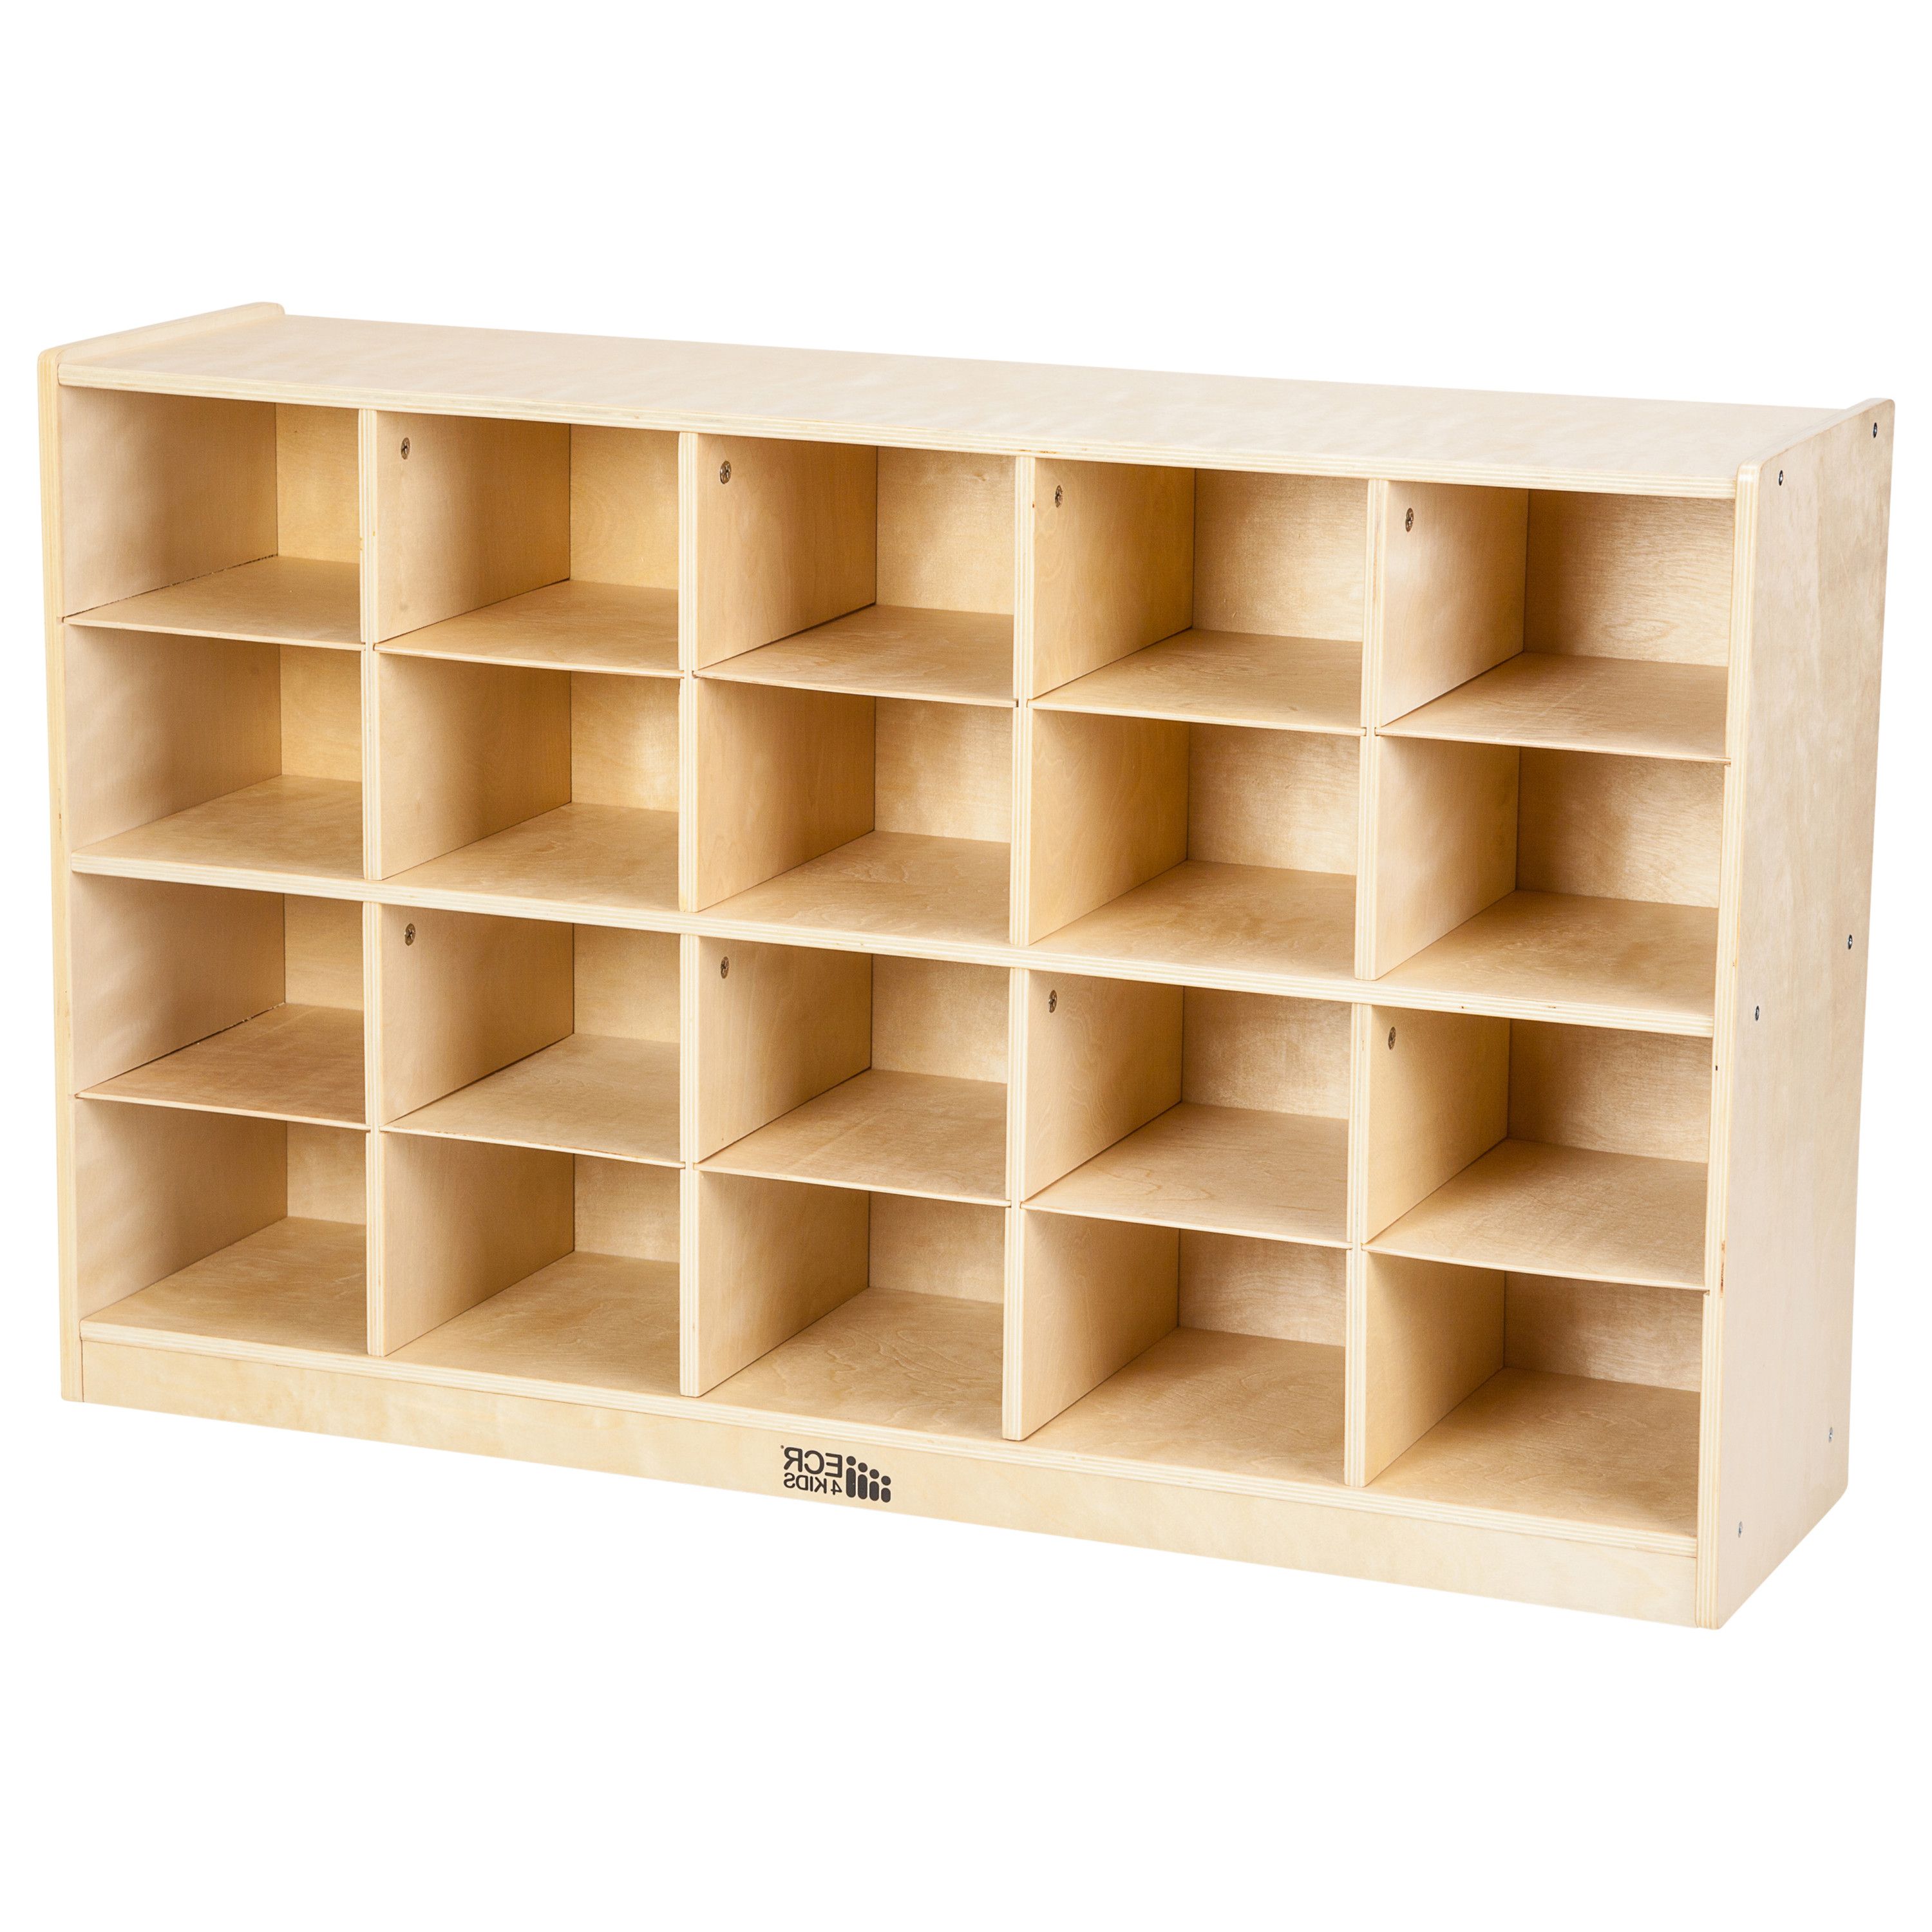 Classroom Cubby Standard Bookcases Pertaining To 2020 Birch Storage Cabinet With 20 Tray Cubbies (View 9 of 20)